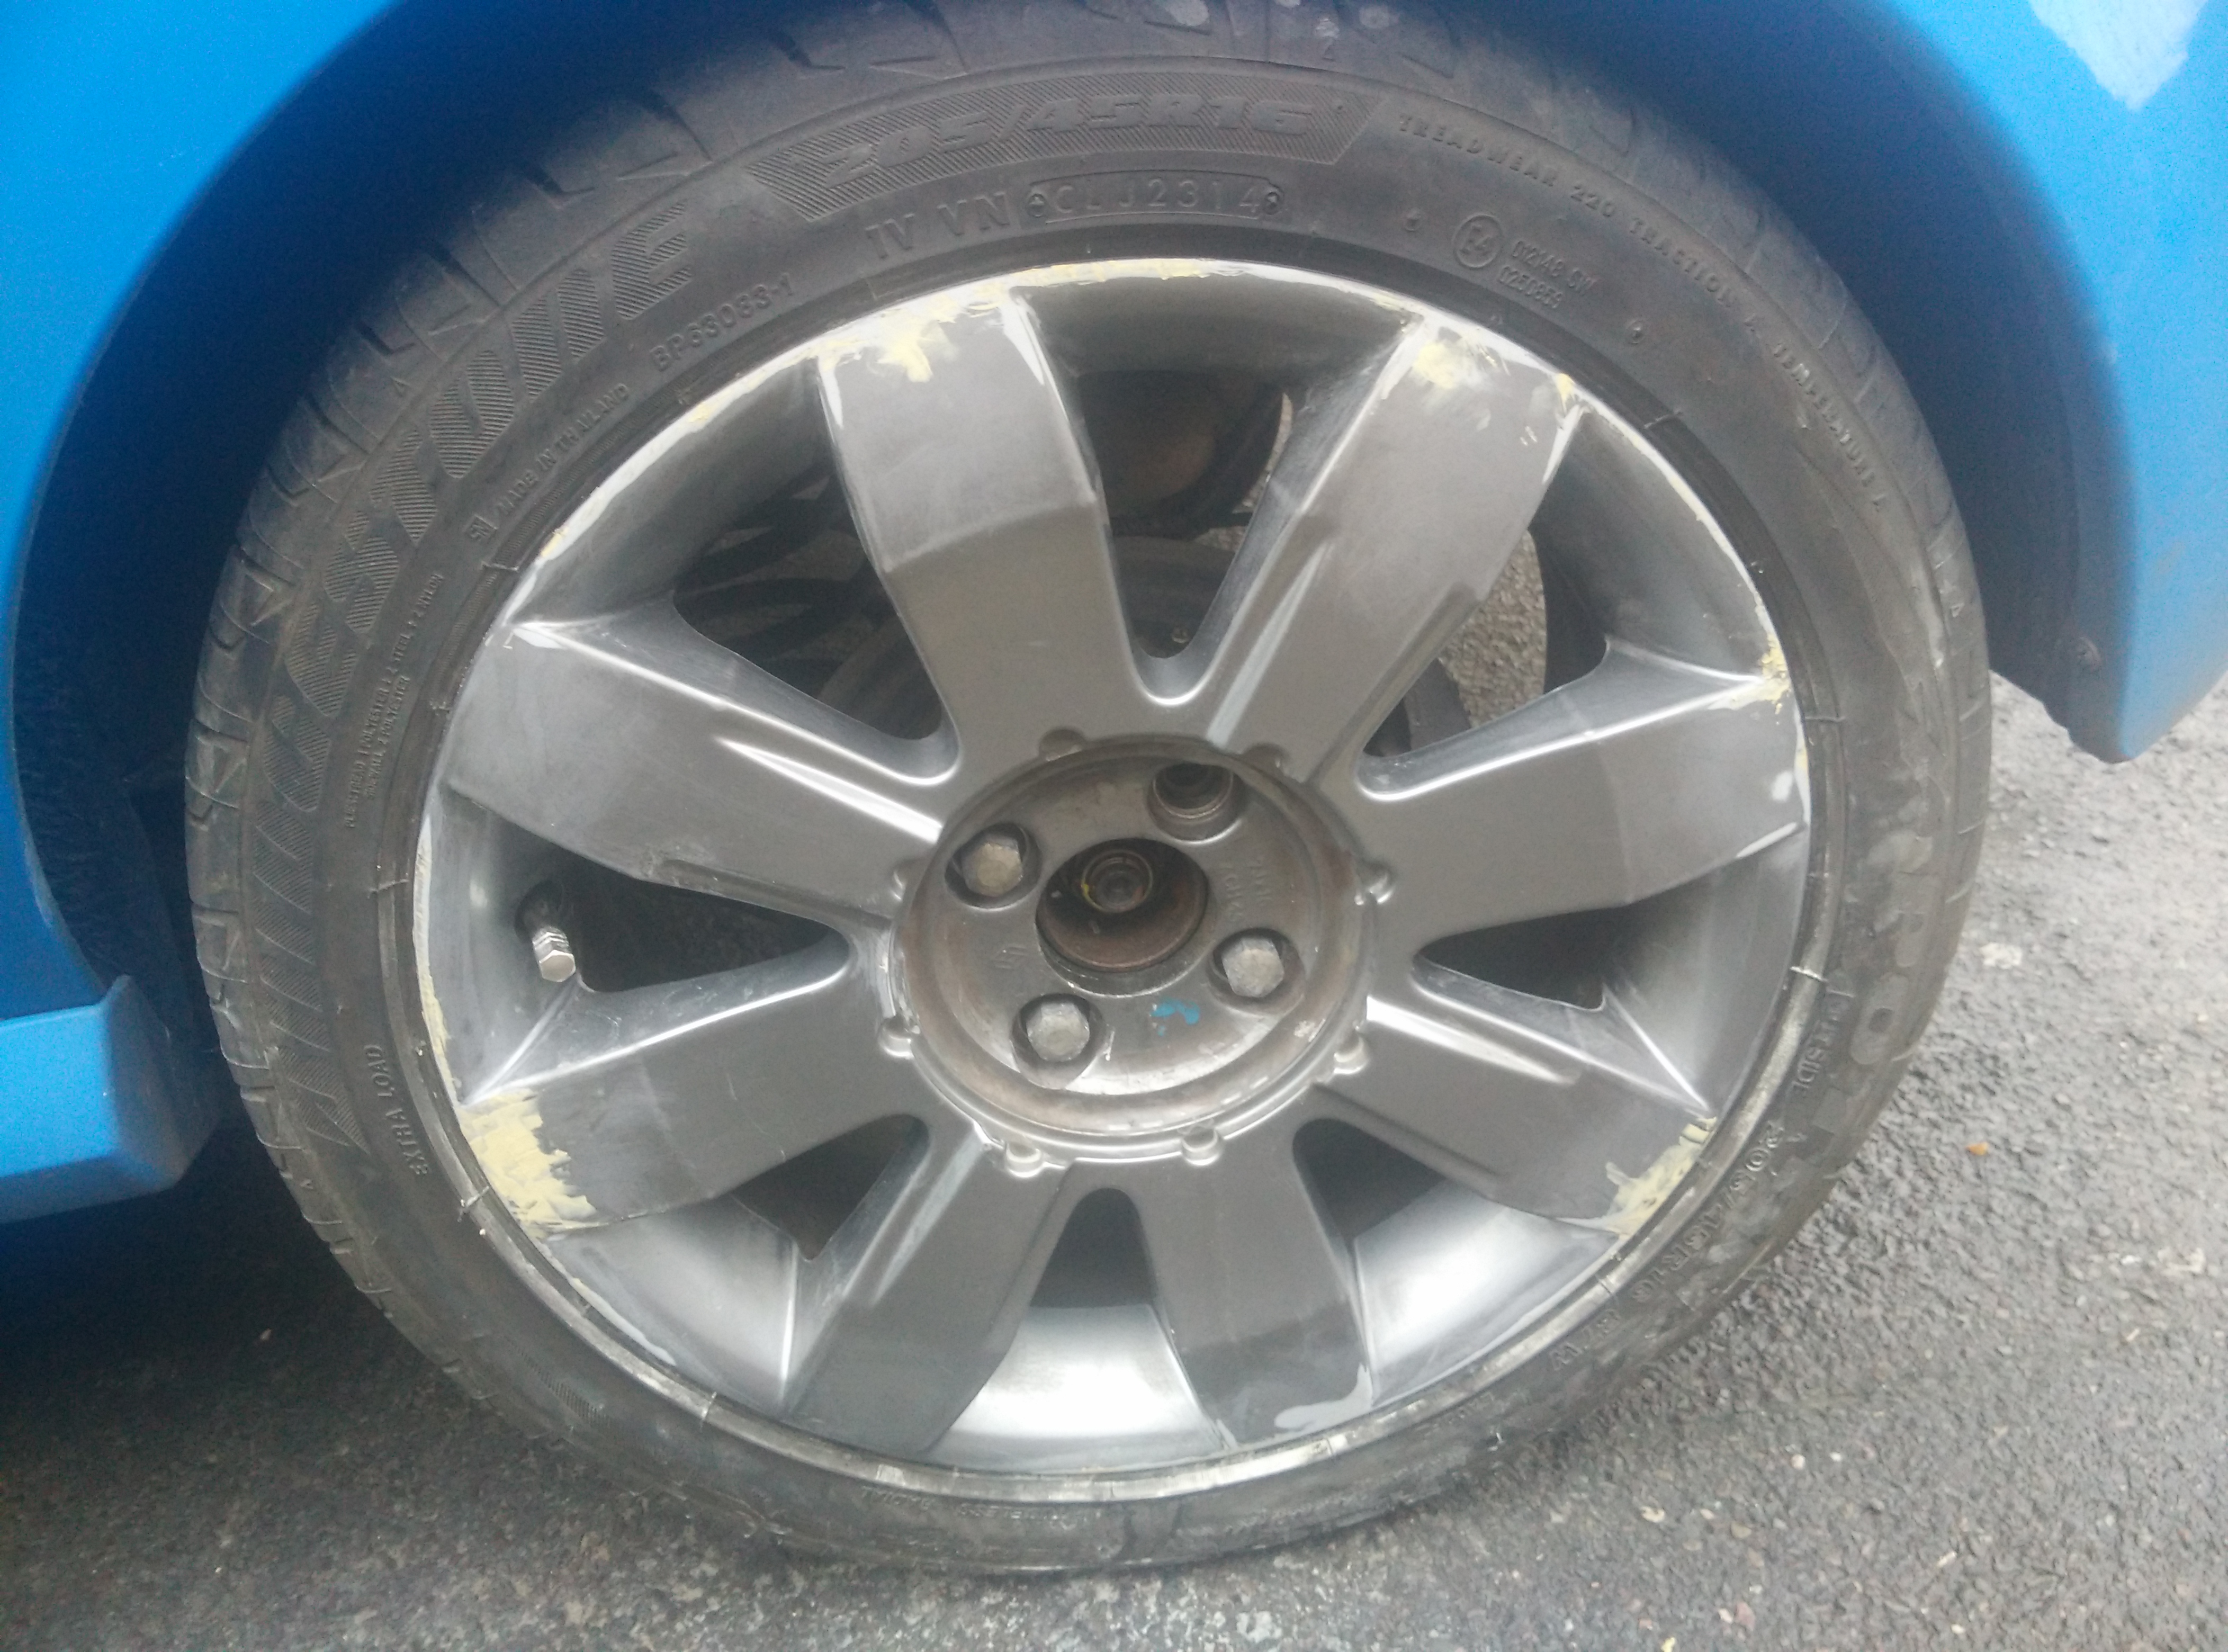 Refurbishing my wheels - filled the scratches